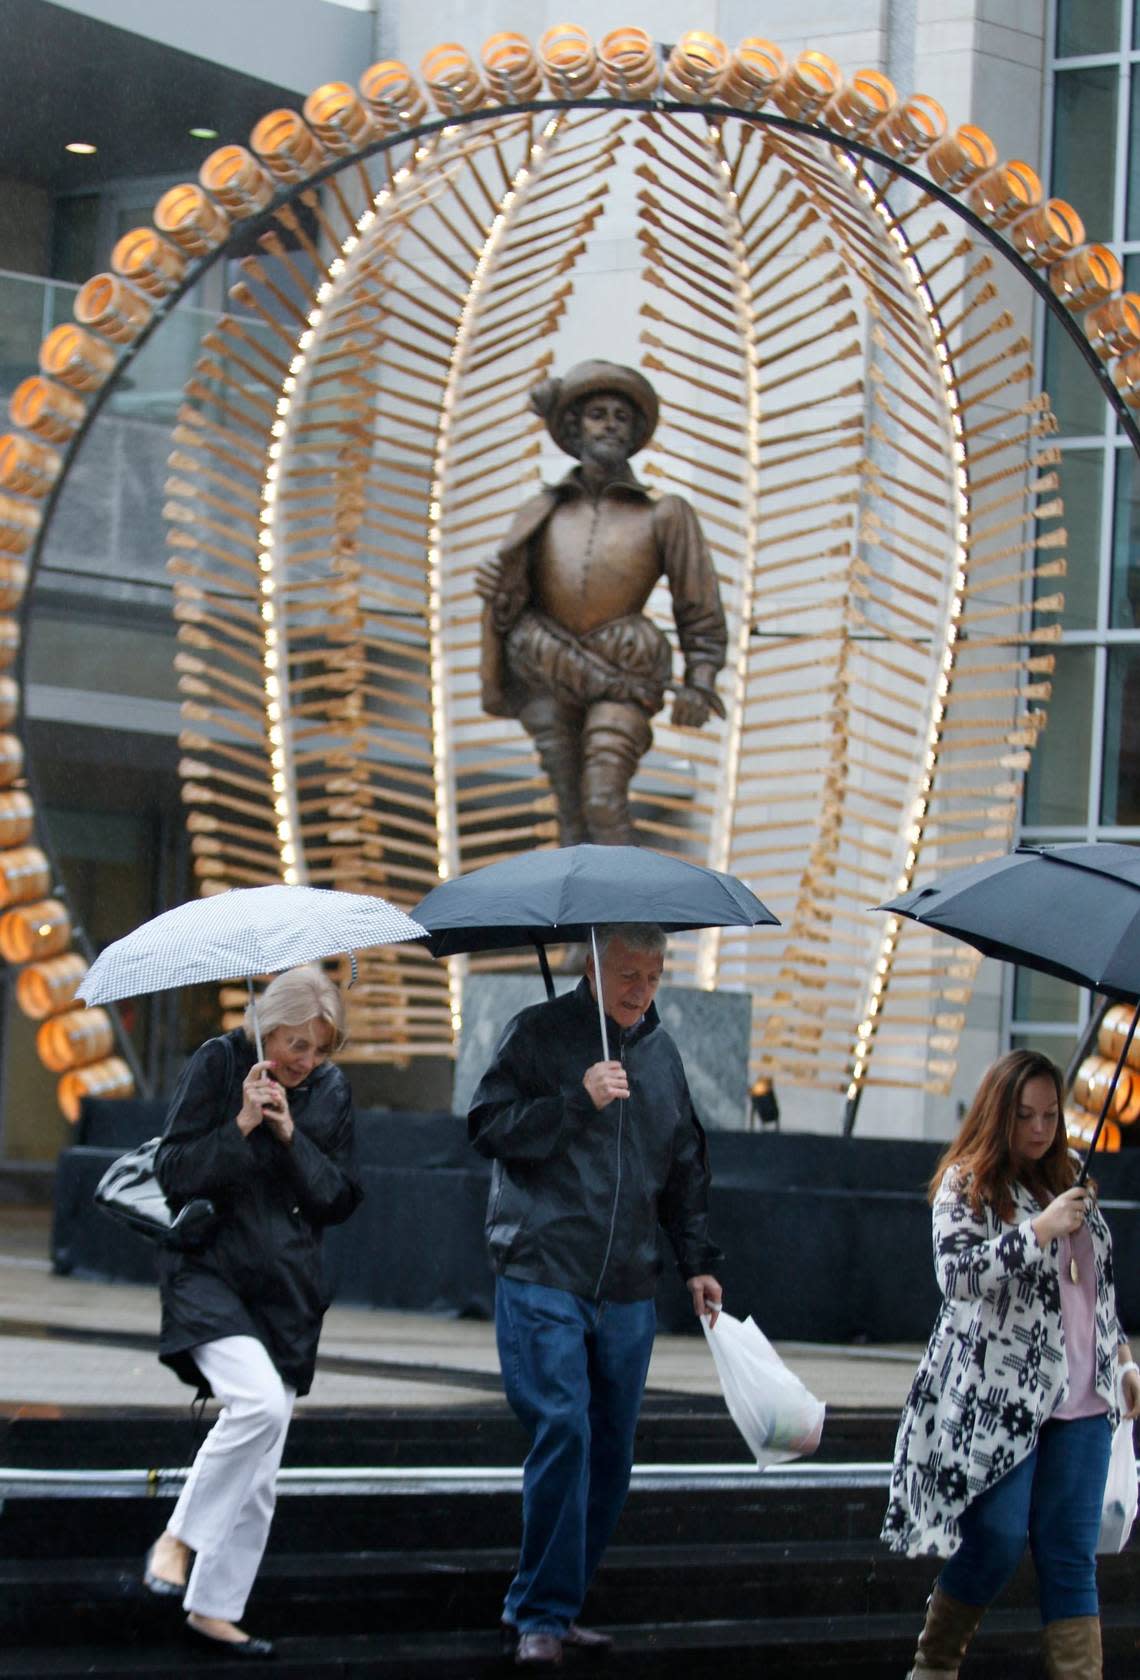 From left, Patricia Oldfield and husband David Oldfield, both visiting from England and family friend Lauren Jones of Raleigh had to put up their umbrellas as they left the Raleigh Convention Center Friday afternoon, October 2, 2015 during the 2015 Wide Open Bluegrass Festival. It was held indoors due to Hurricane Joaquin.